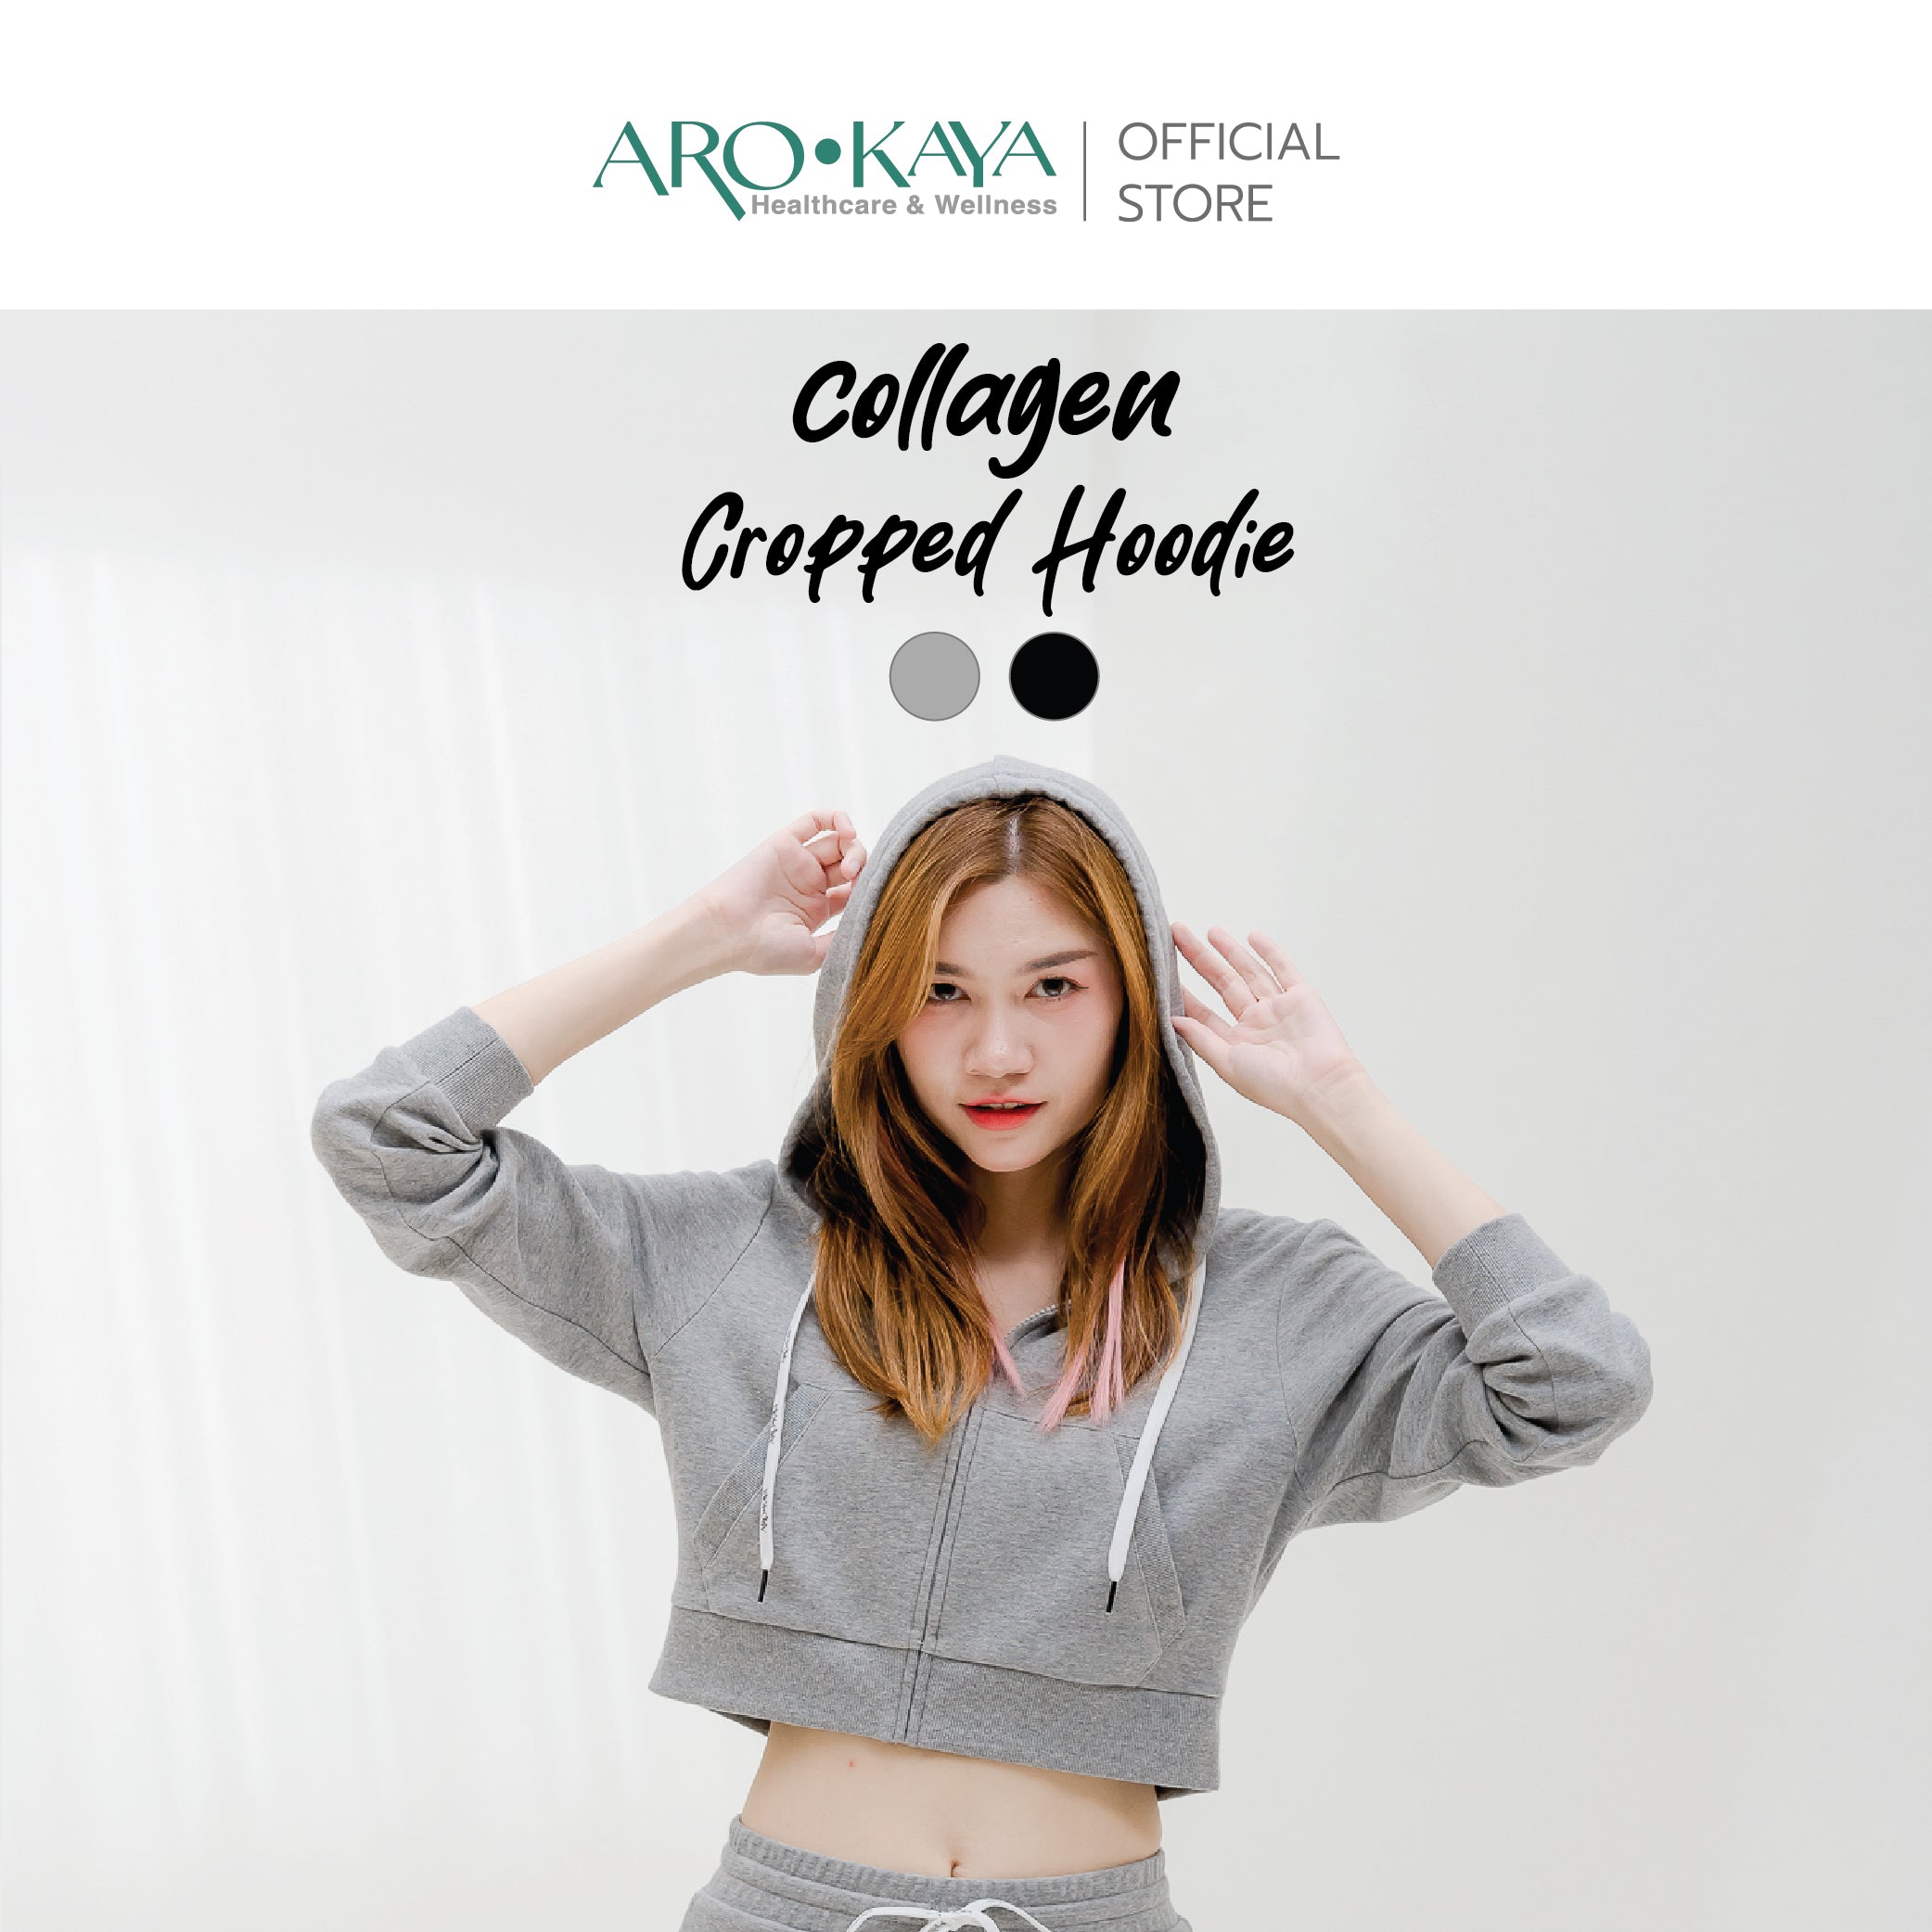 COLLAGEN CROPPED HOODIE